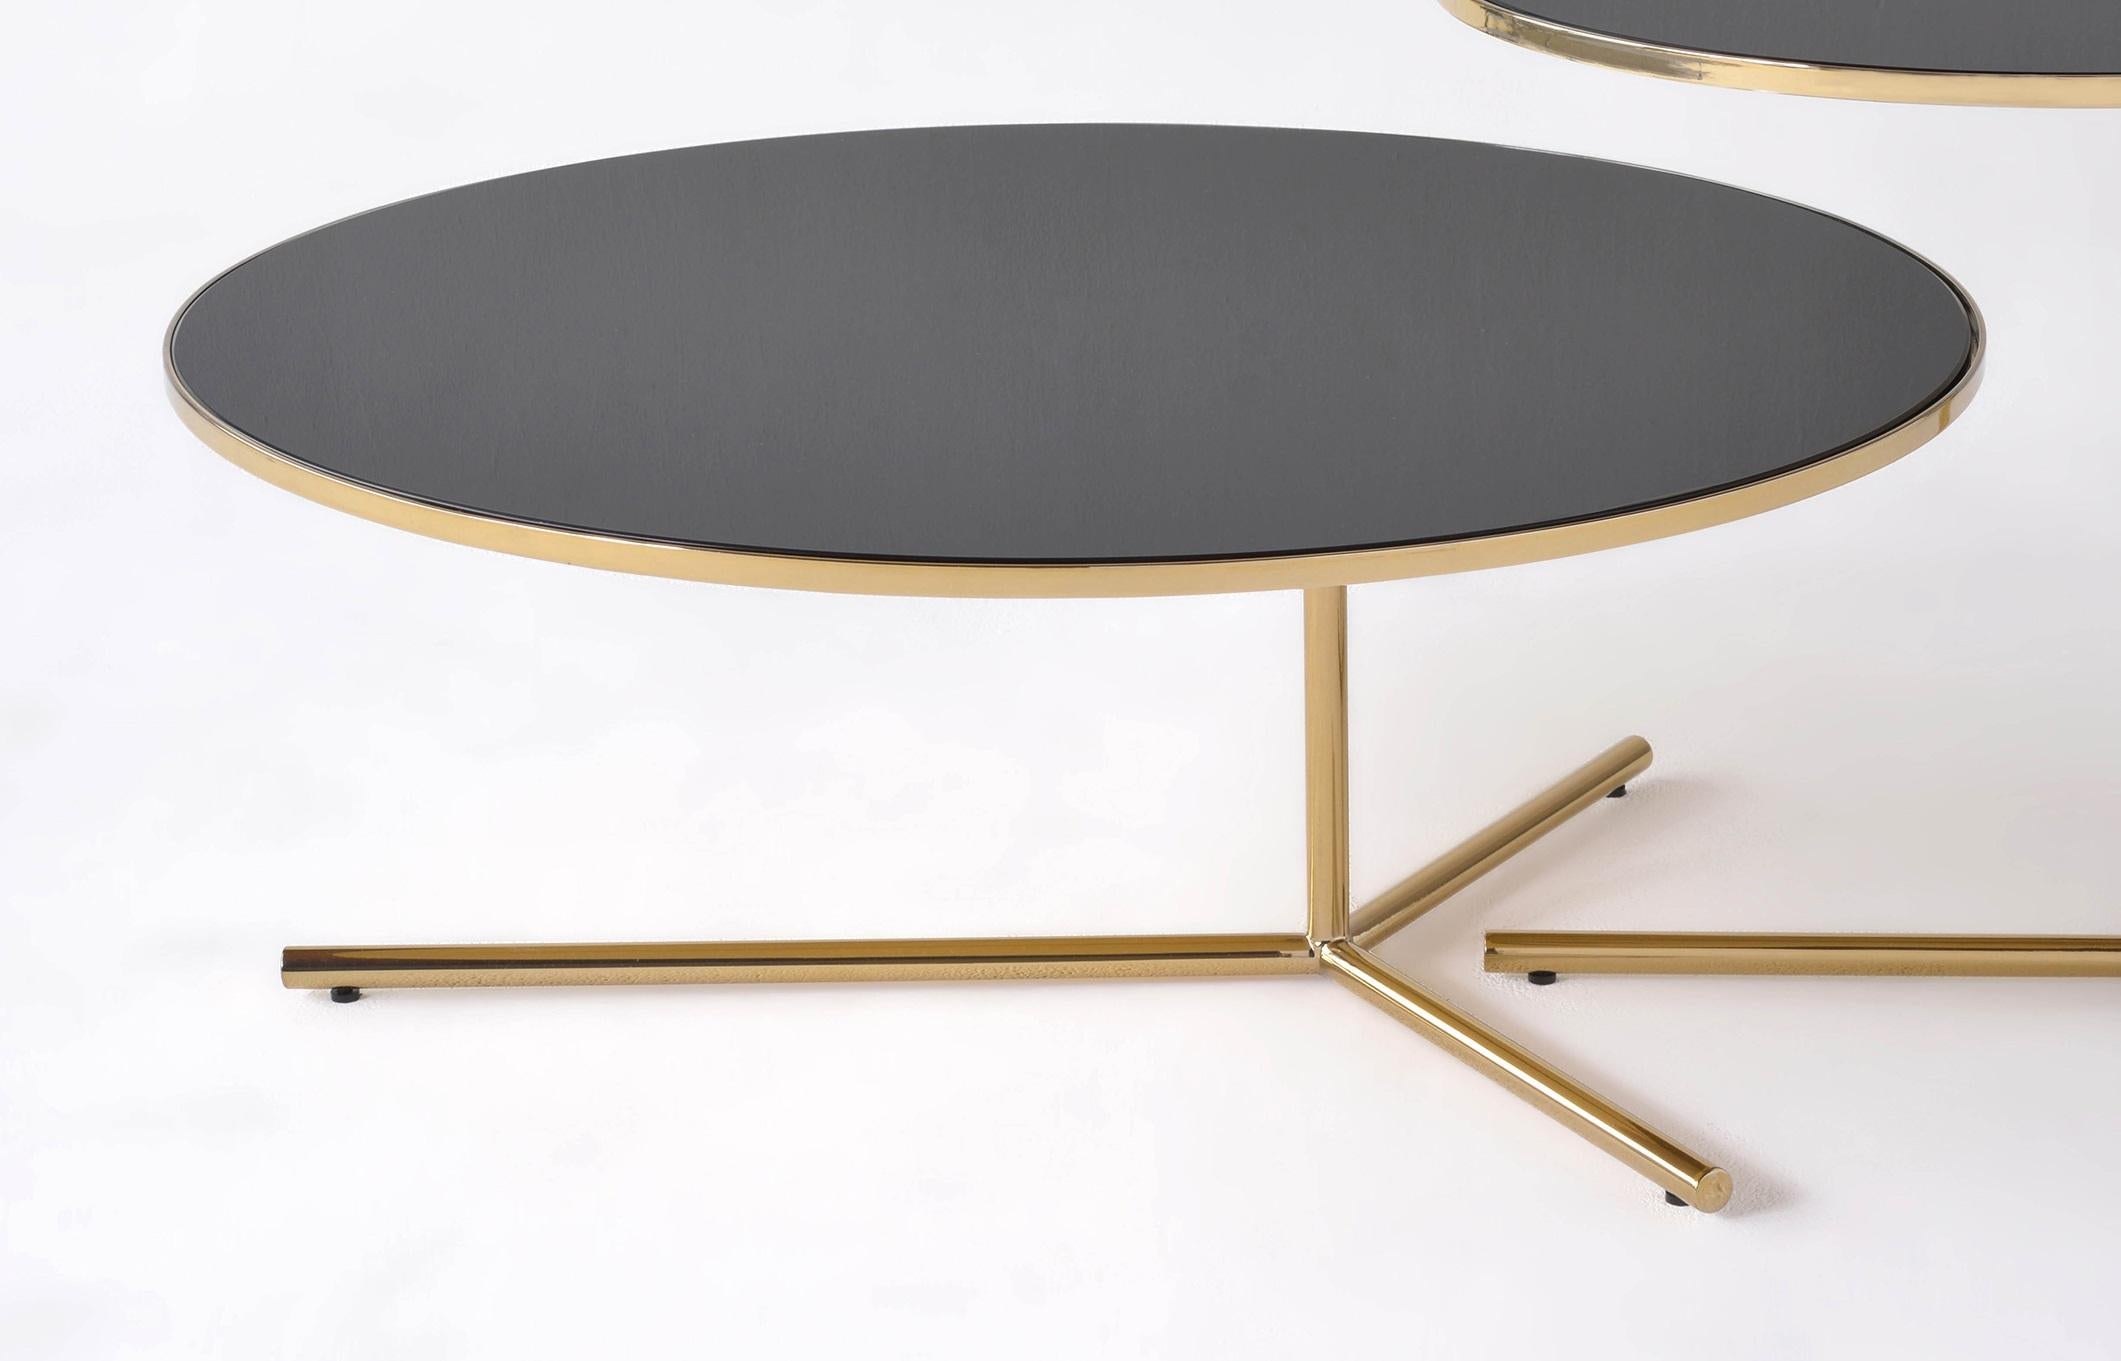 Downtown Large Table by Phase Design
Dimensions: Ø 76,2 x H 30,5 cm. 
Materials: Spandrel glass, steel and polished brass.

Solid steel base available in flat or gloss black and white powder coat, polished chrome, burnt copper, or smoked brass